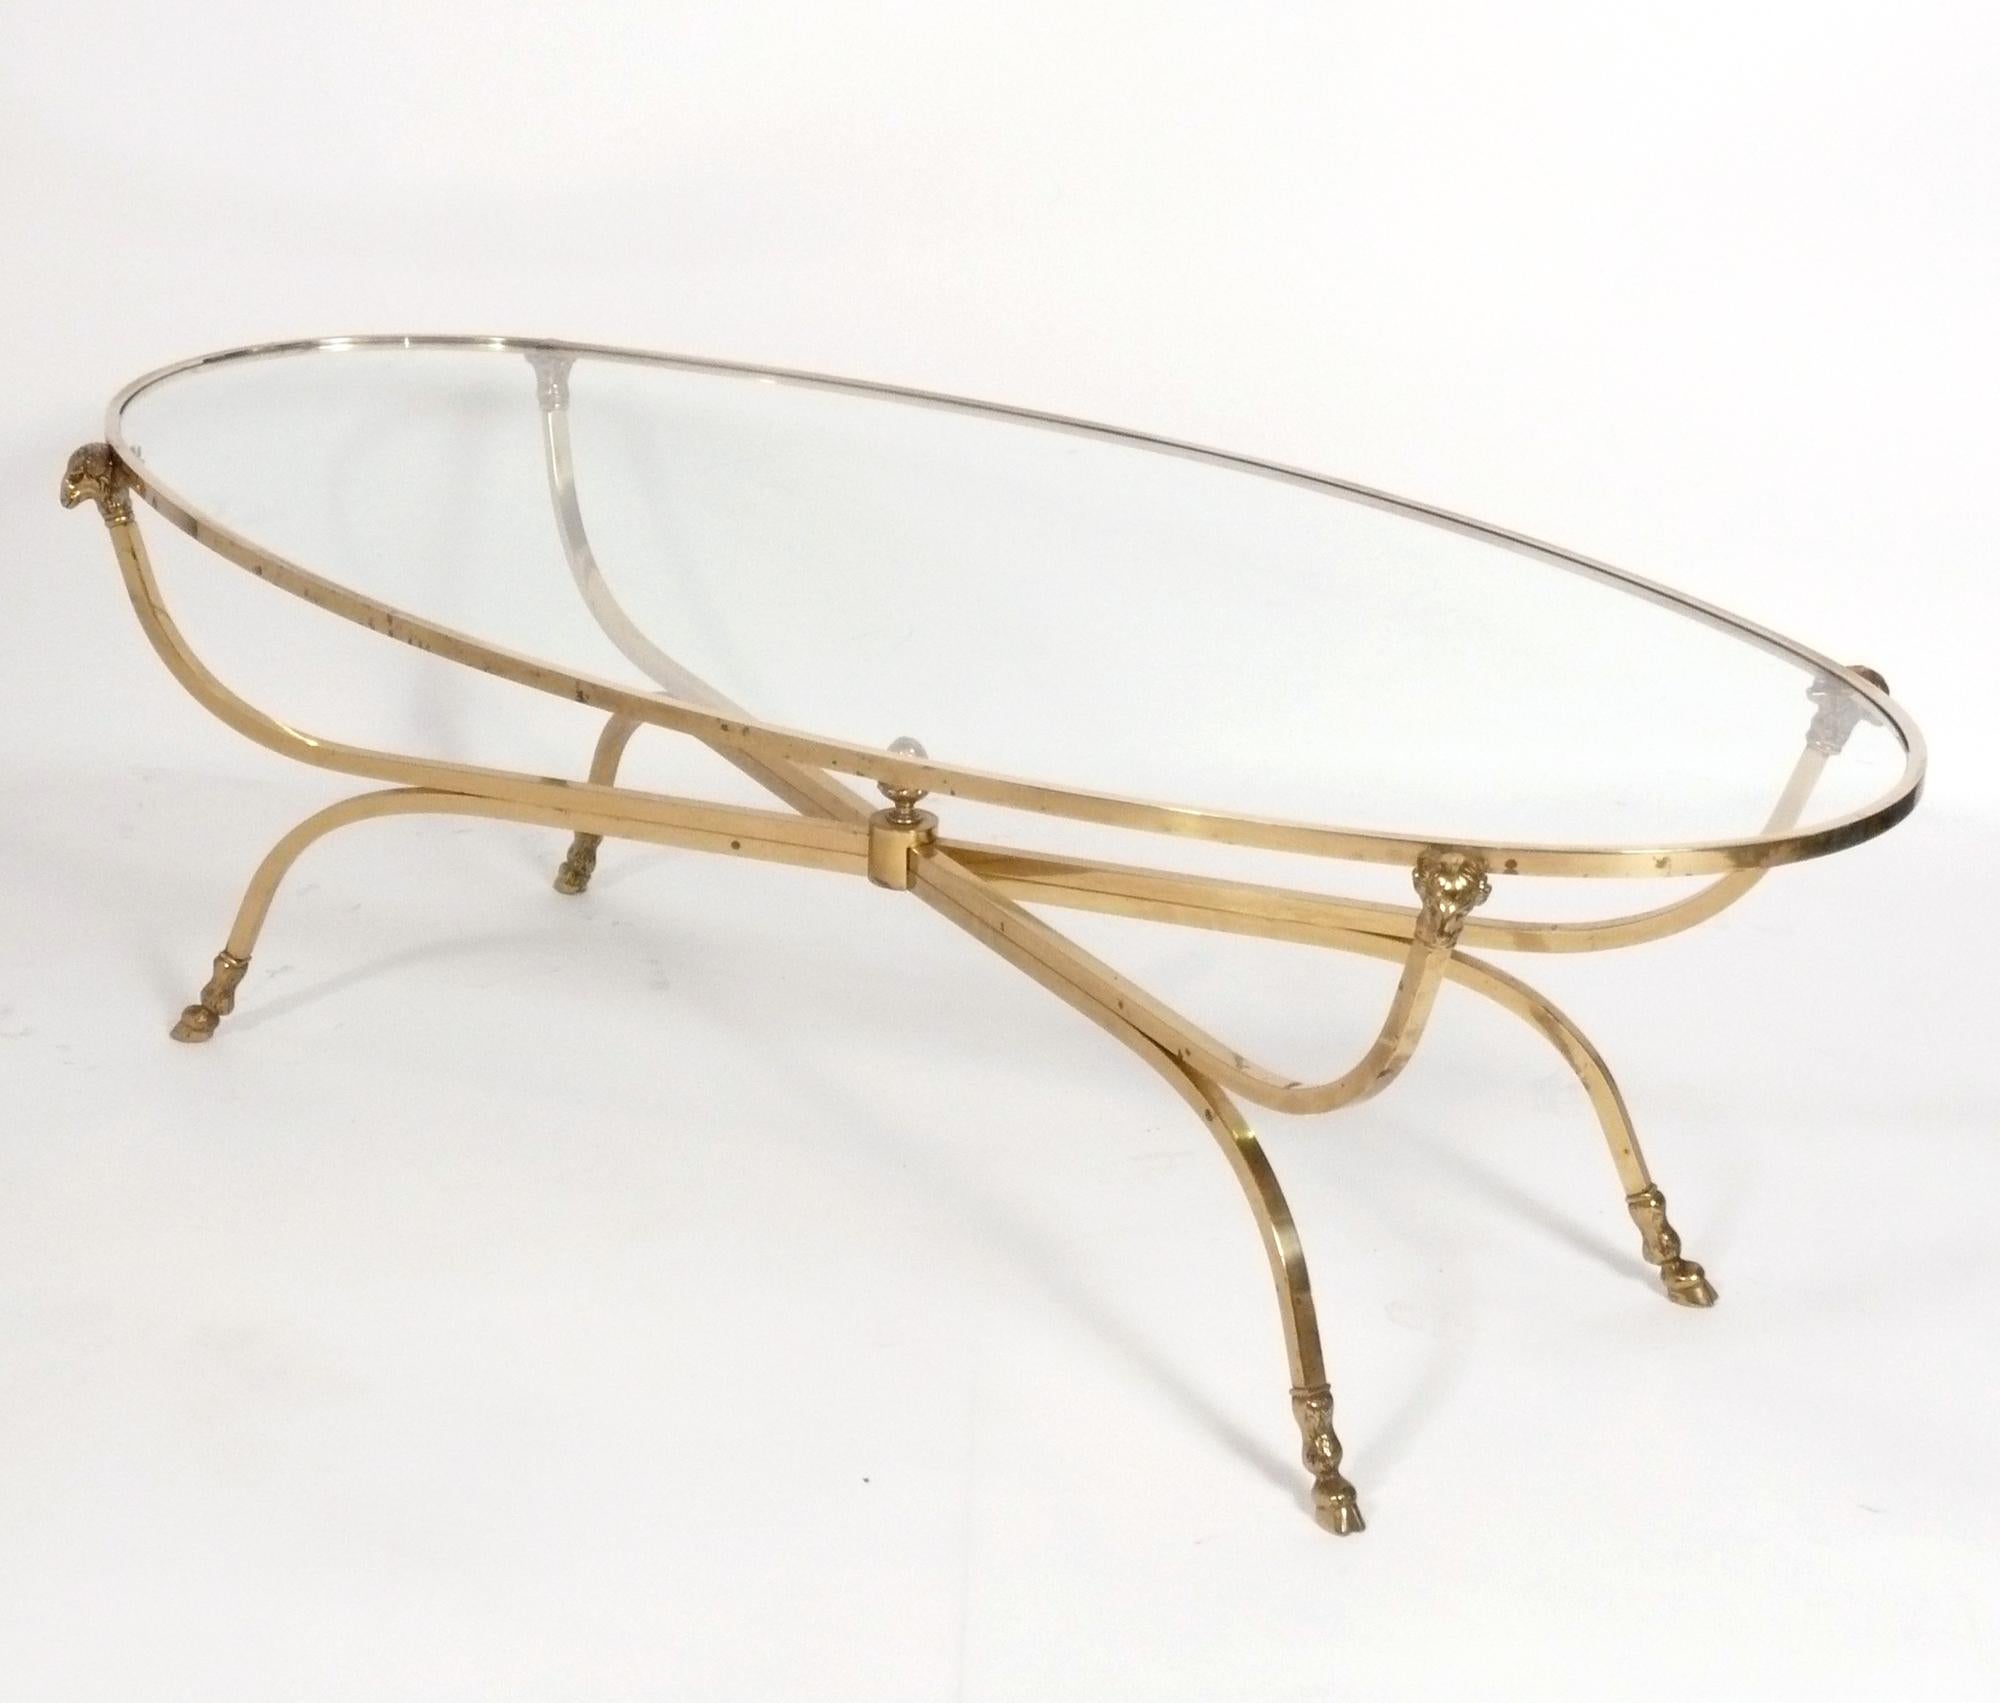 Elegant brass rams head coffee table in the manner of Maison Jansen, unsigned, French, circa 1950s. This coffee table is a very high quality construction, with crisp casting to the ram’s heads at the top, as well as their hoofed feet at the bottom.